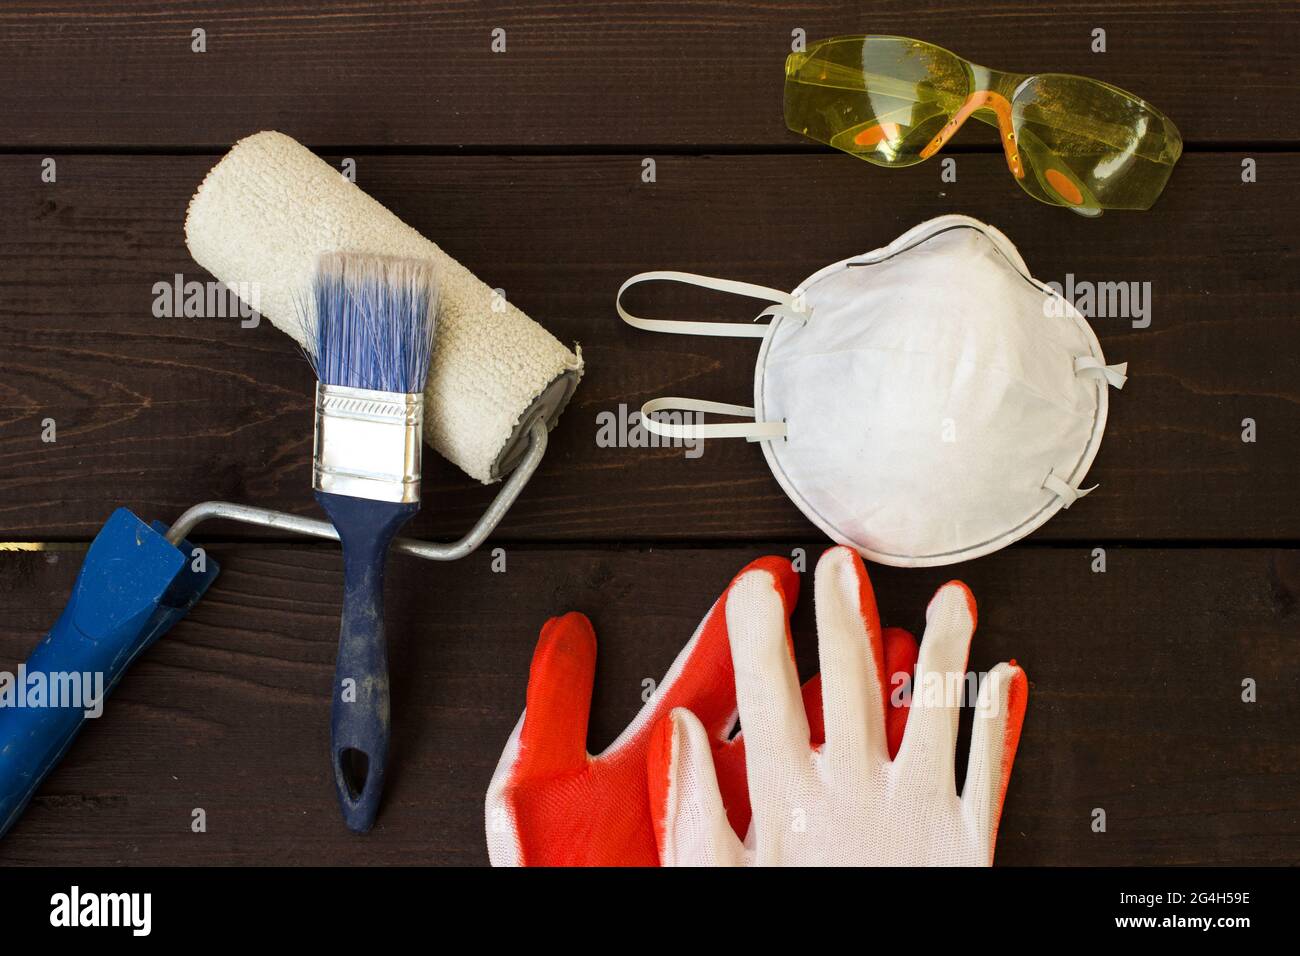 Flat lay composition with safety equipment on wooden background. Industrial protective gear on wooden table. Work safety Stock Photo